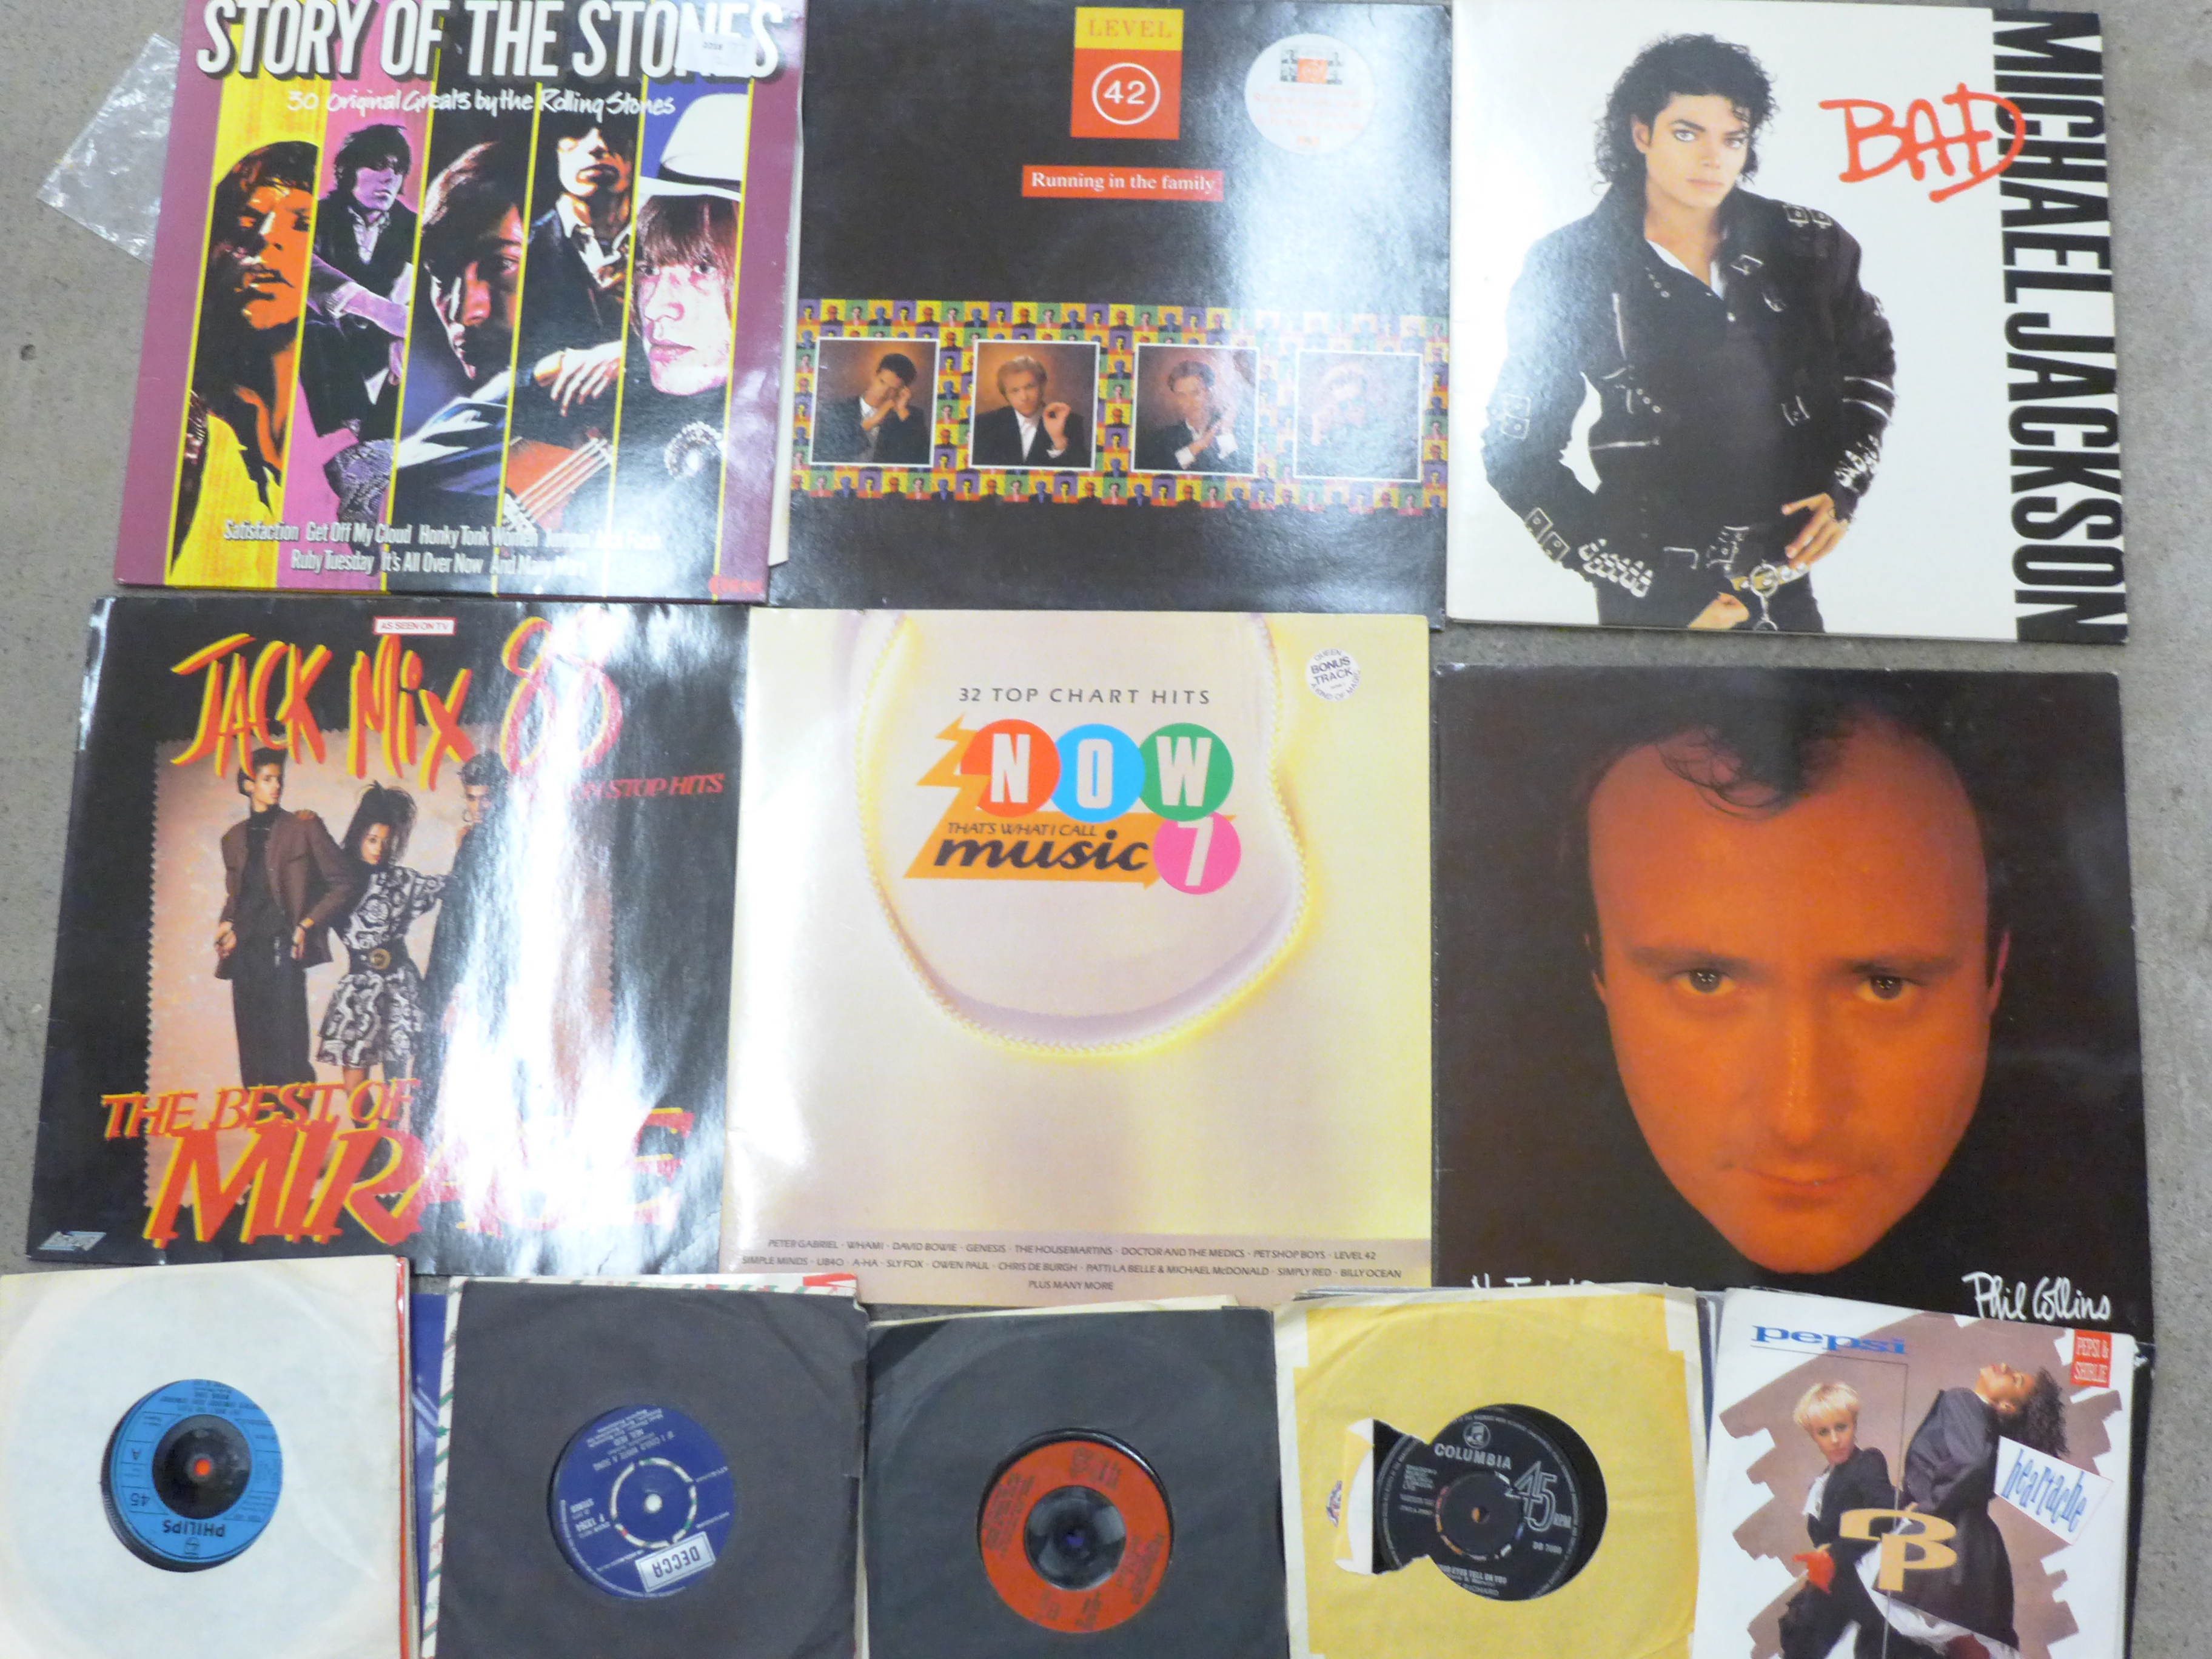 A collection of mainly 1970s and 1980s LP records including Story of The Stones and 7" singles